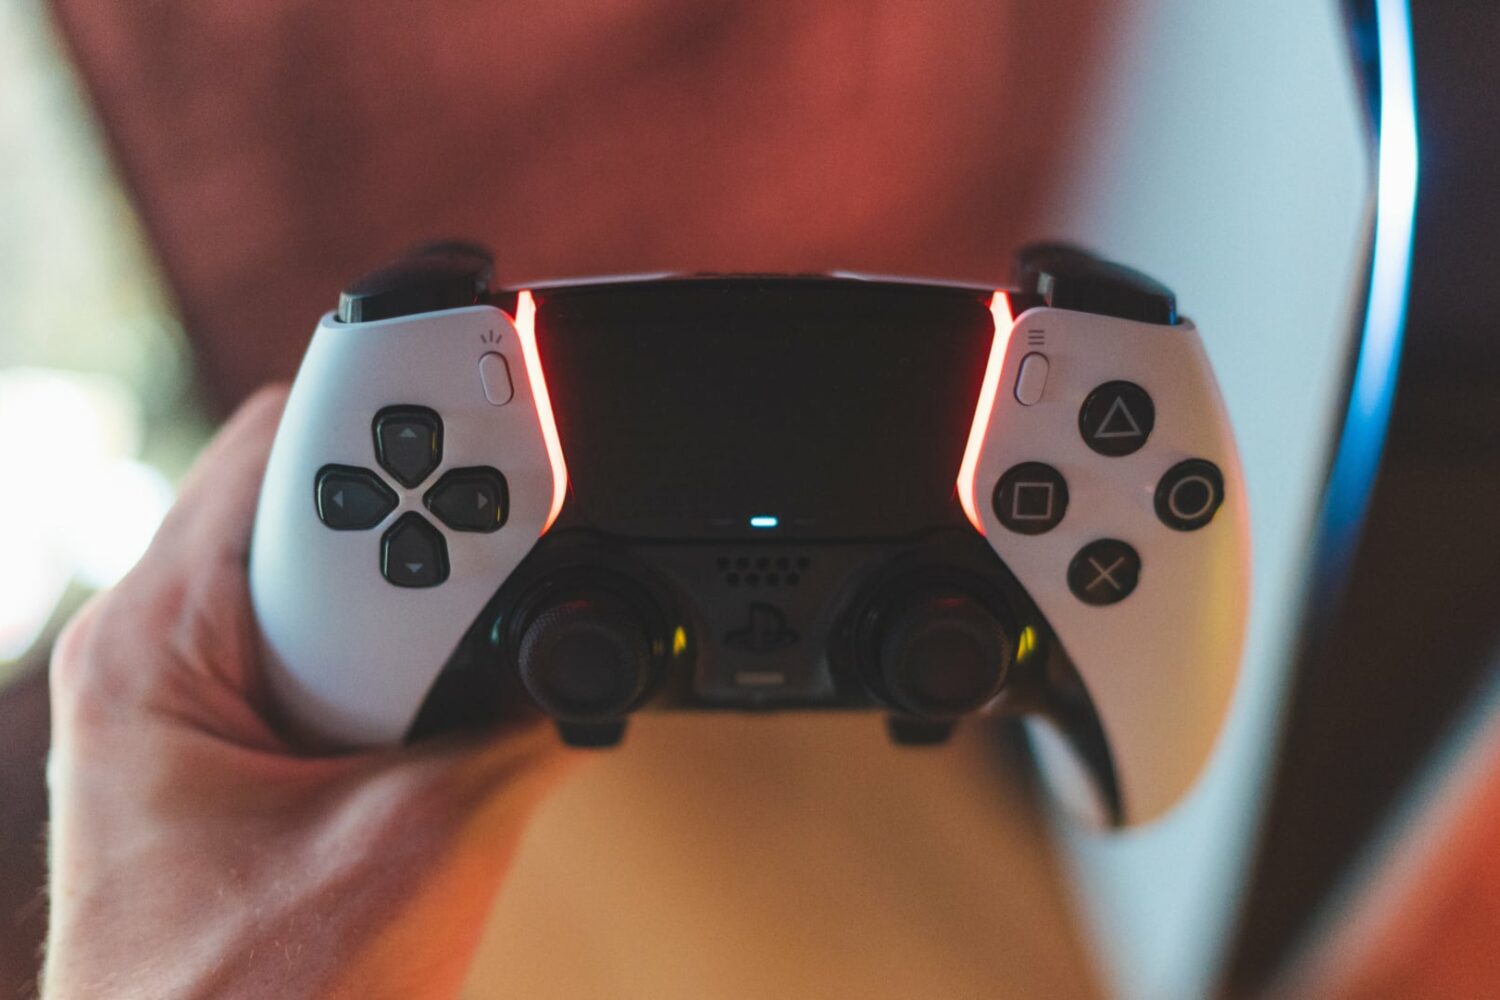 Sony's DualSense Edge controller in a person's hand, set against a blurred background